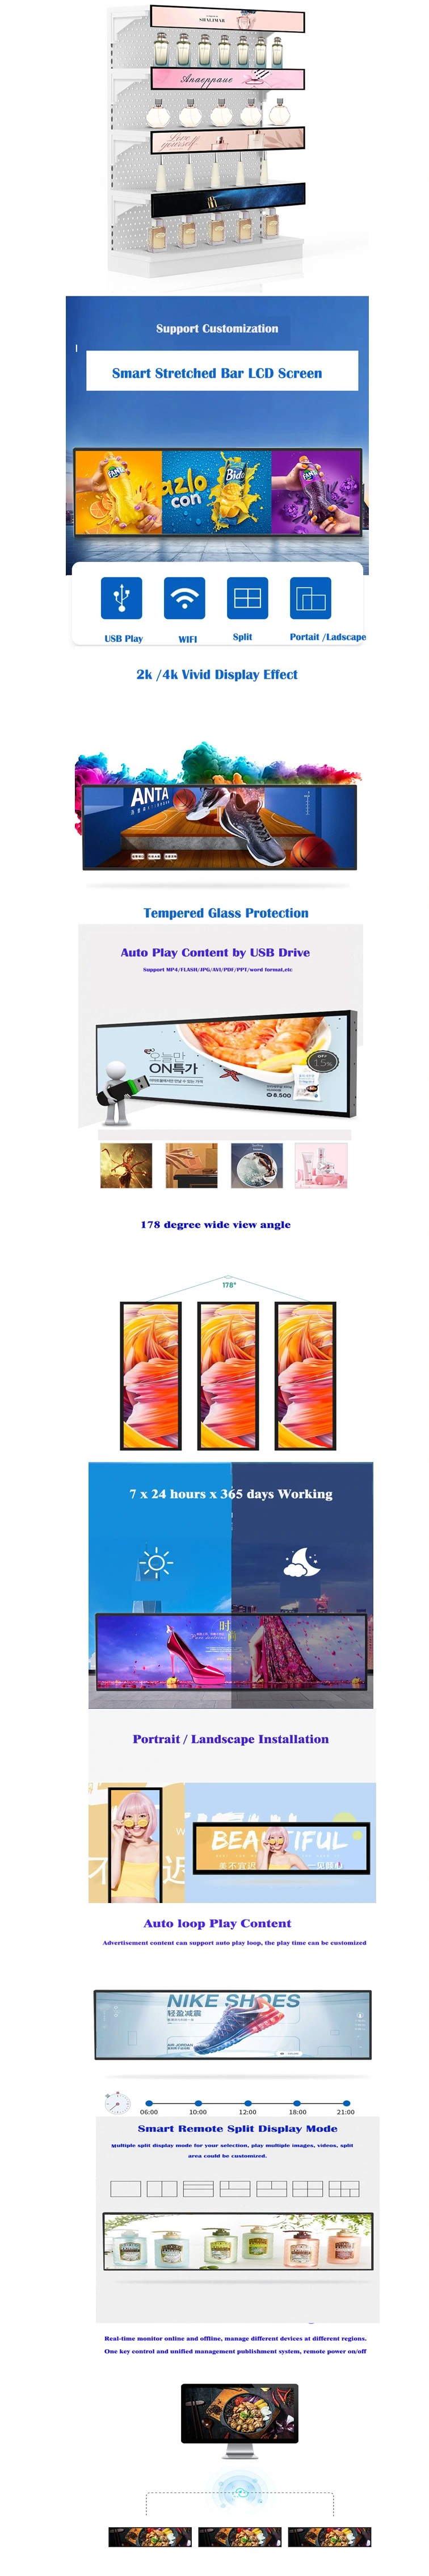 28.6-Inch Interactive Indoor Stretched Bar LCD Display Shelf Advertising Player Touch Screen with Metal Enclosure Design LED Bar Display for Store Shopping Mall